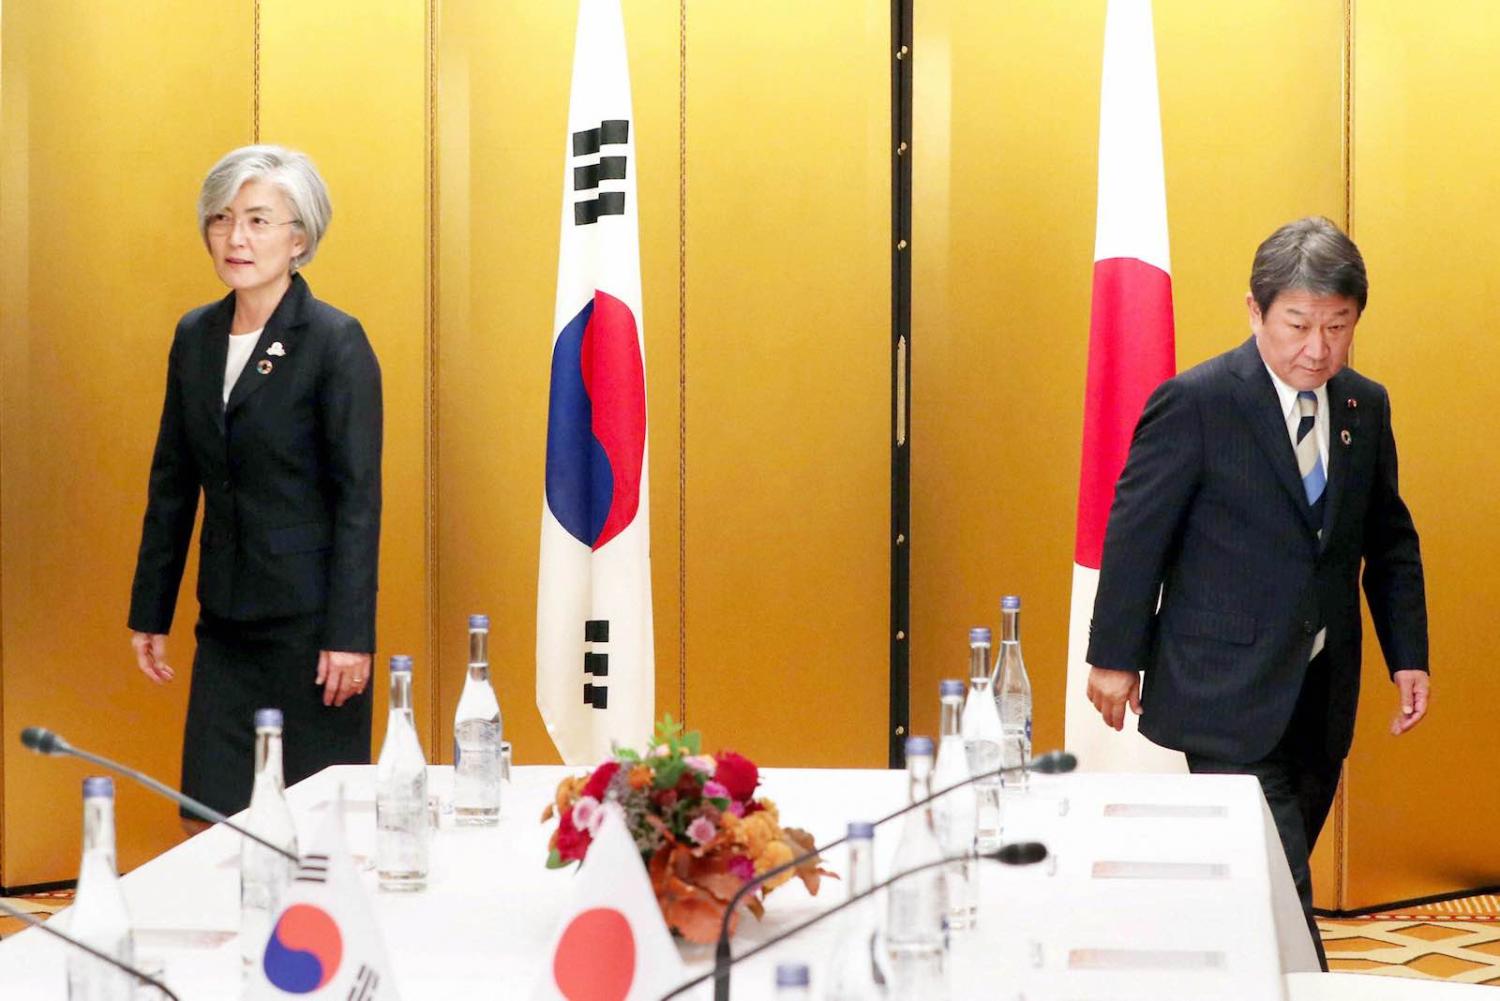 South Korean Foreign Minister Kang Kyung-wha (L) and Japanese Foreign Minister Toshimitsu Motegi meeting on the sidelines of the G20 Foreign Ministers Meeting, 23 November 2019 in Nagoya, Japan (The Asahi Shimbun via Getty Images)